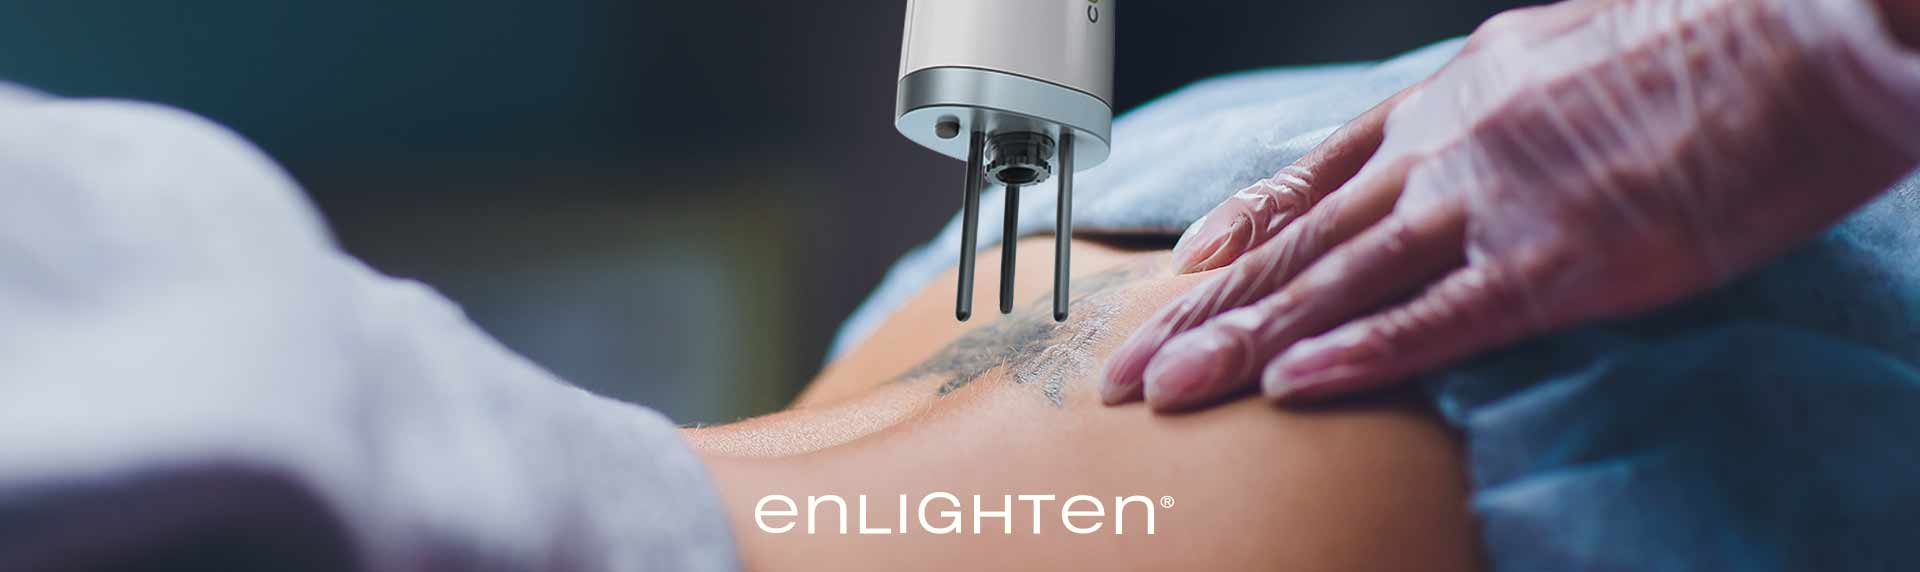 Cutera enlighten Laser Tattoo and Pigment Removal Pittsburgh PA